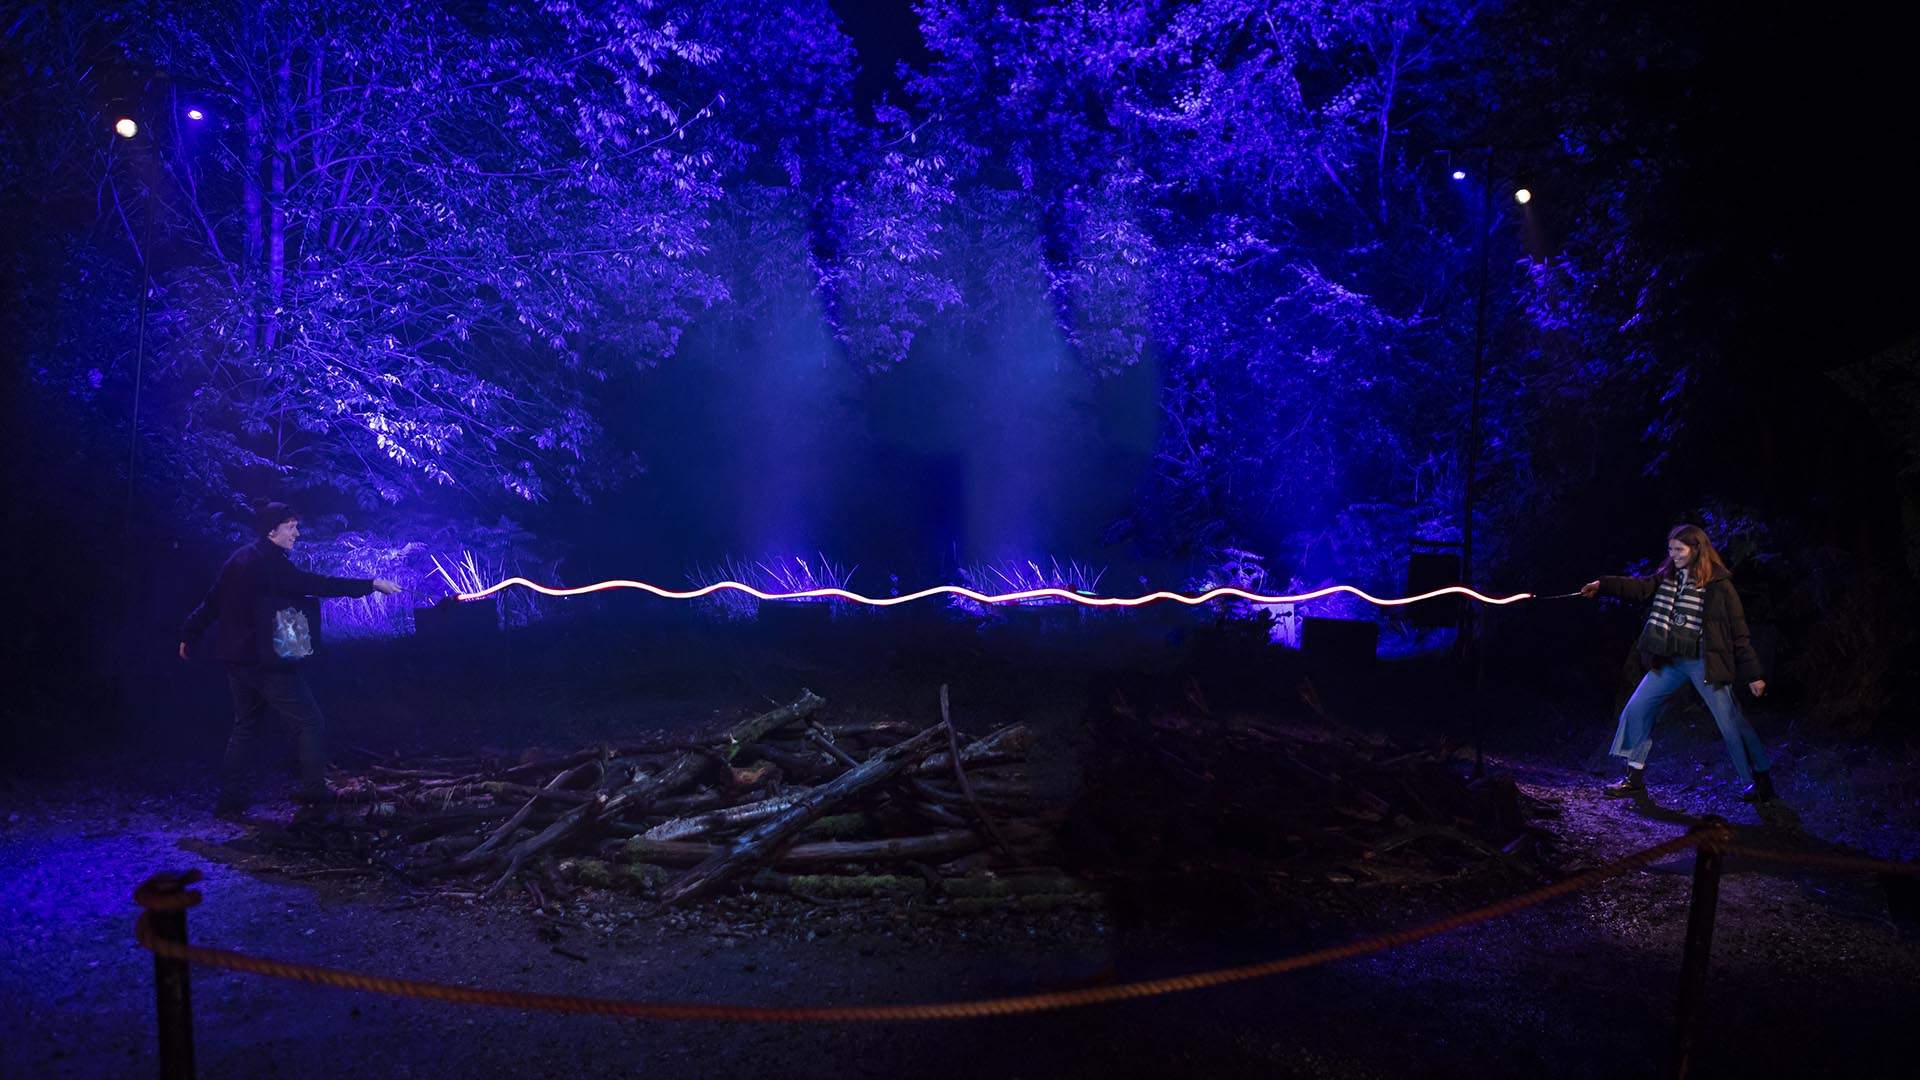 Now Open: The Magical 'Harry Potter' Forbidden Forest Experience Has Arrived in Australia